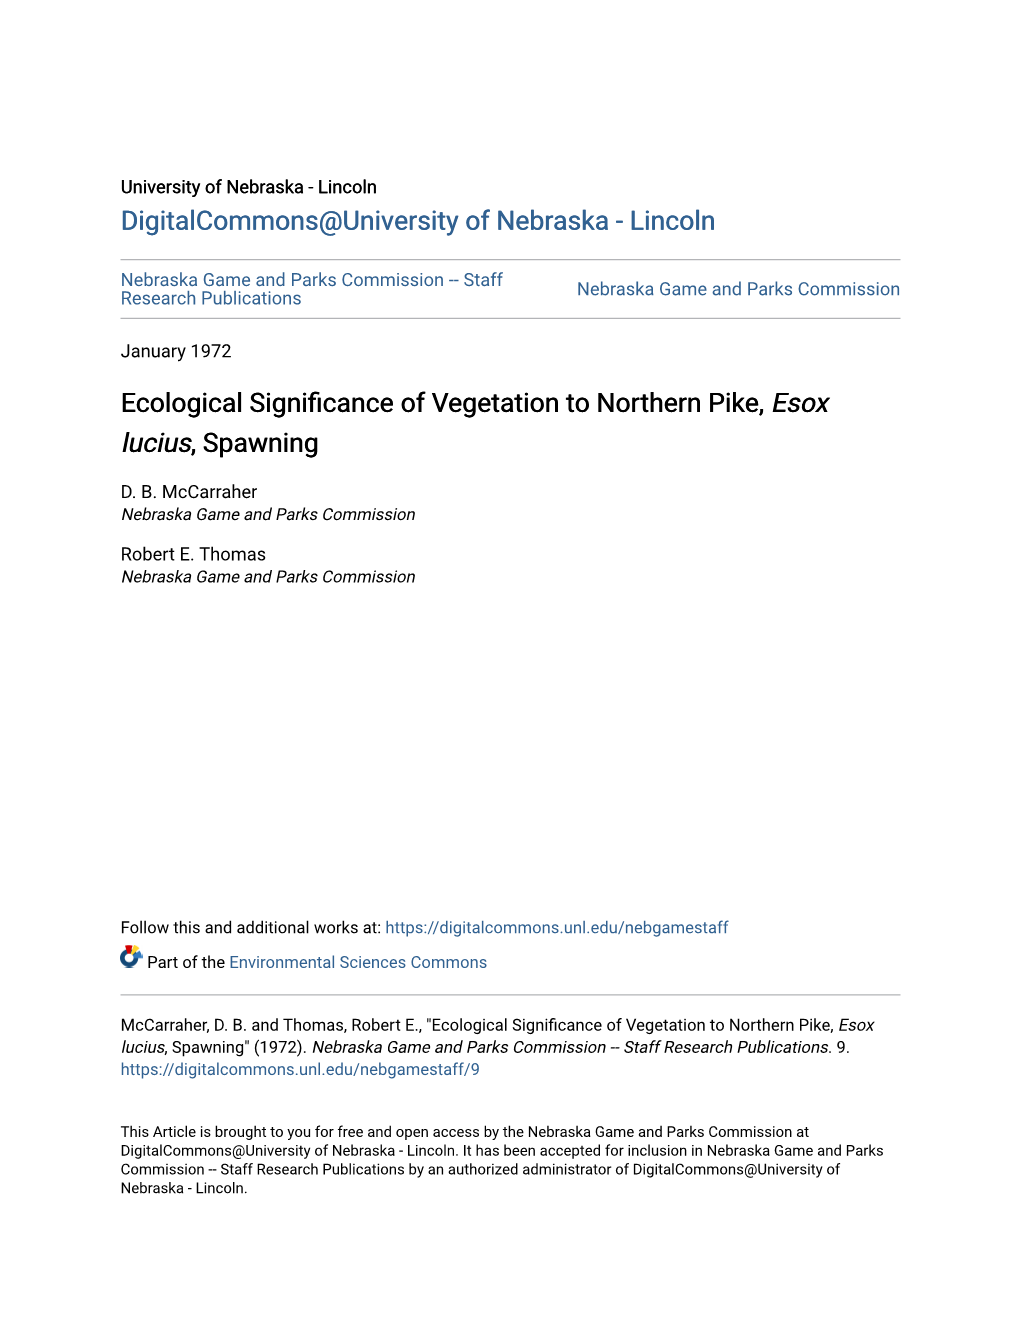 Ecological Significance of Vegetation to Northern Pike, Esox Lucius